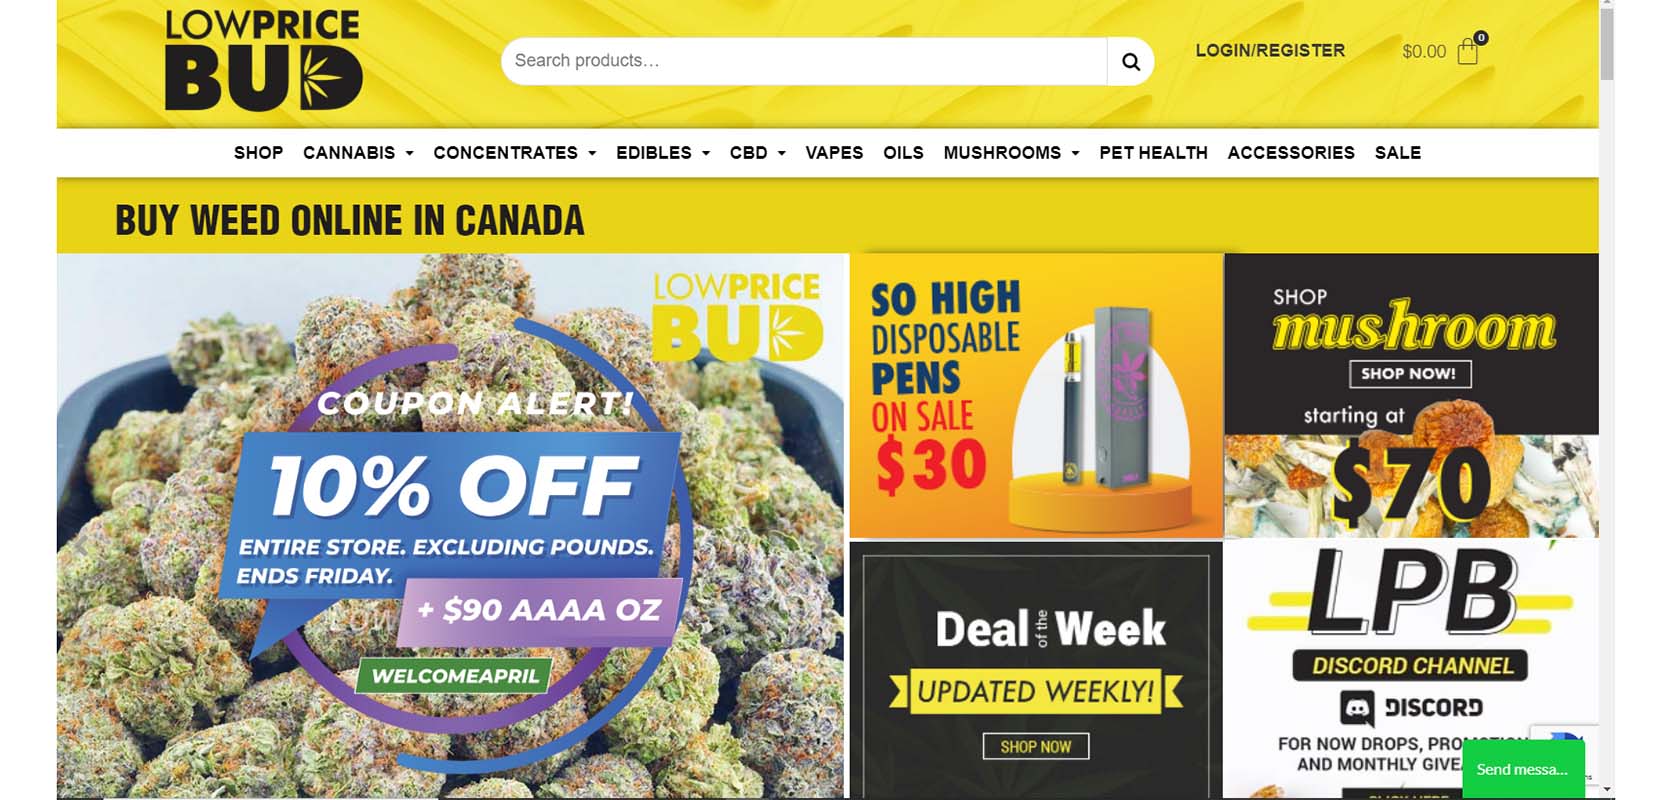 Homepage image of Low Price Bud online dispensary to buy hash online in Canada. 